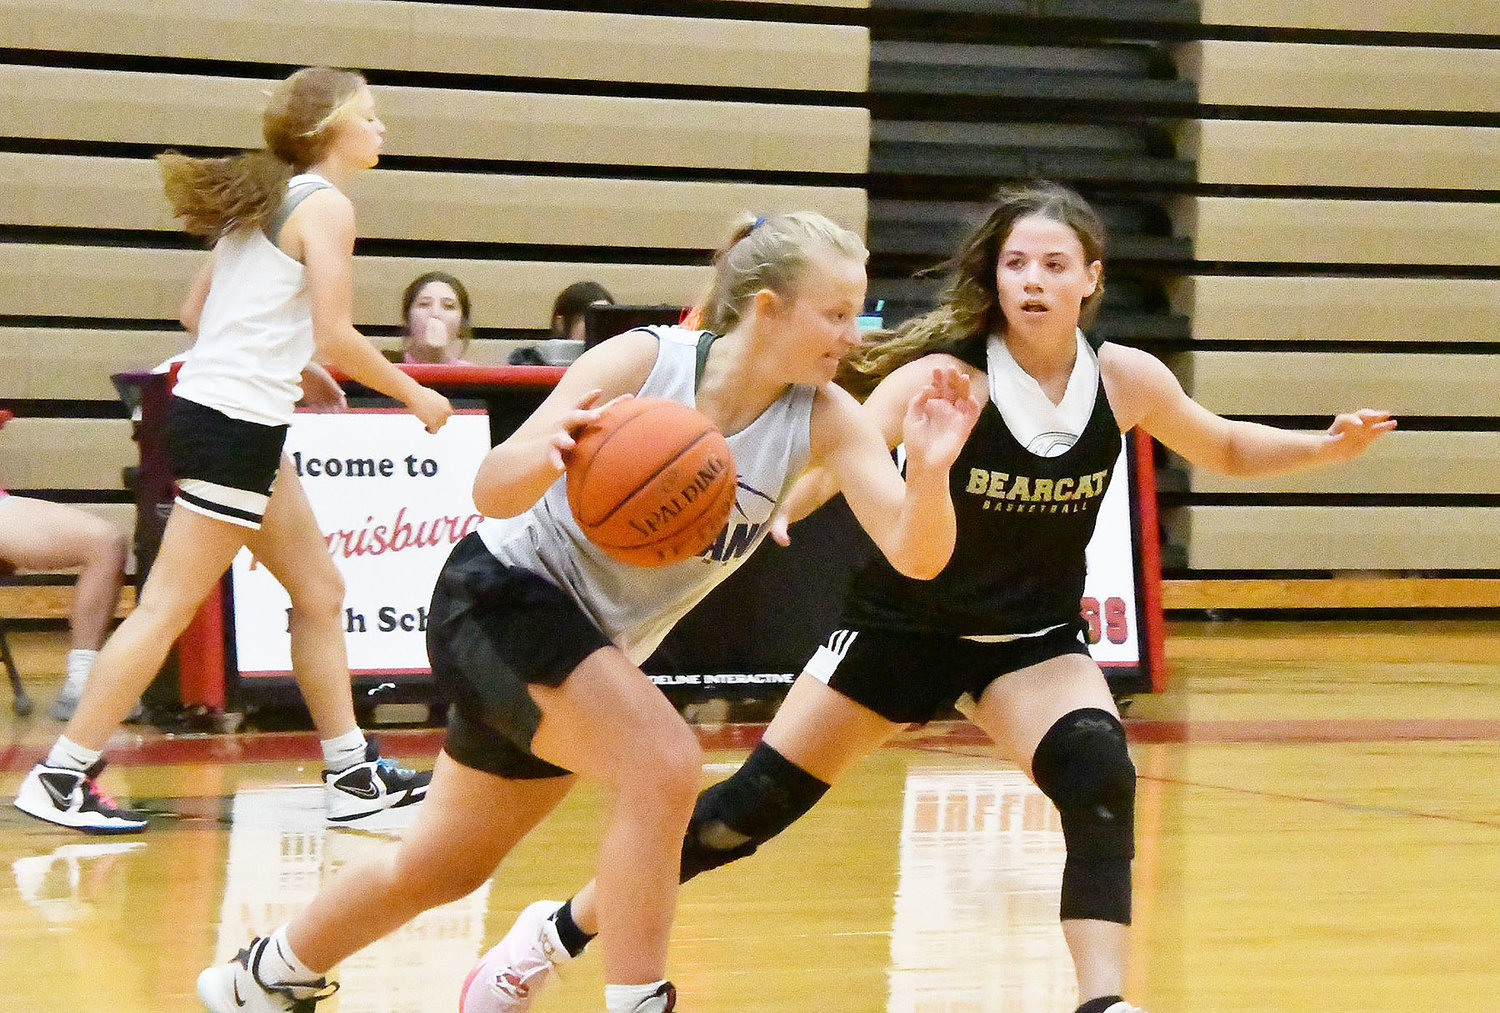 Cairo's Olivia Cross applies escort pressure defense while guarding a player from Hermann.